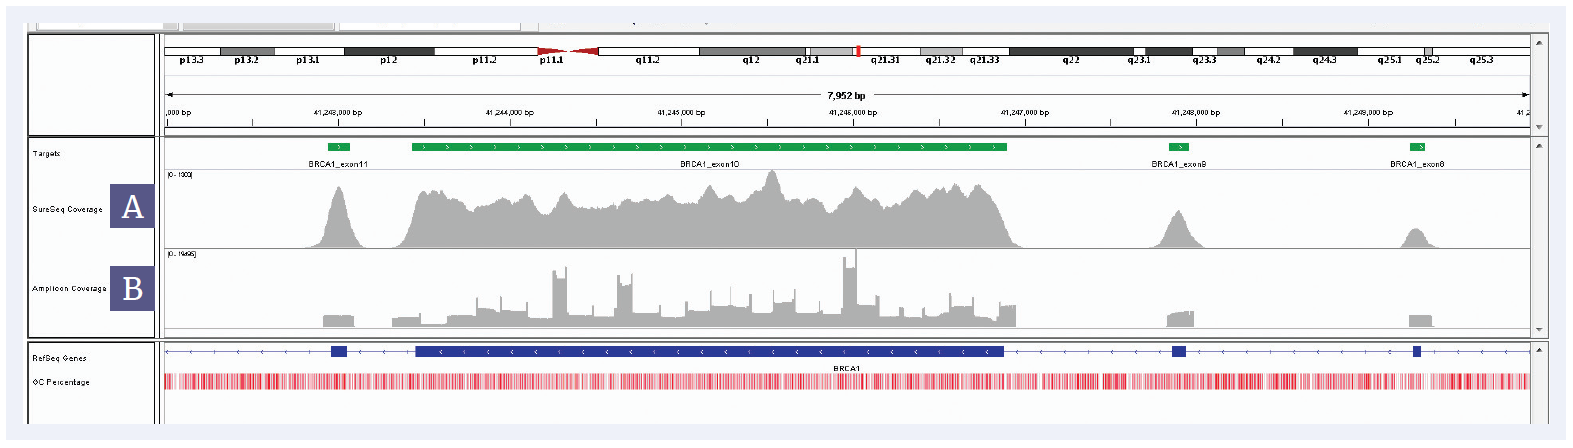 Figure 1: BRCA1 exons 8, 9, 10 and 11 coverage. [A] SureSeq, [B] Amplicon panel. Depth of coverage per base (grey). Targeted region (green). Gene coding region as defined by RefSeq (blue). GC percentage (red).